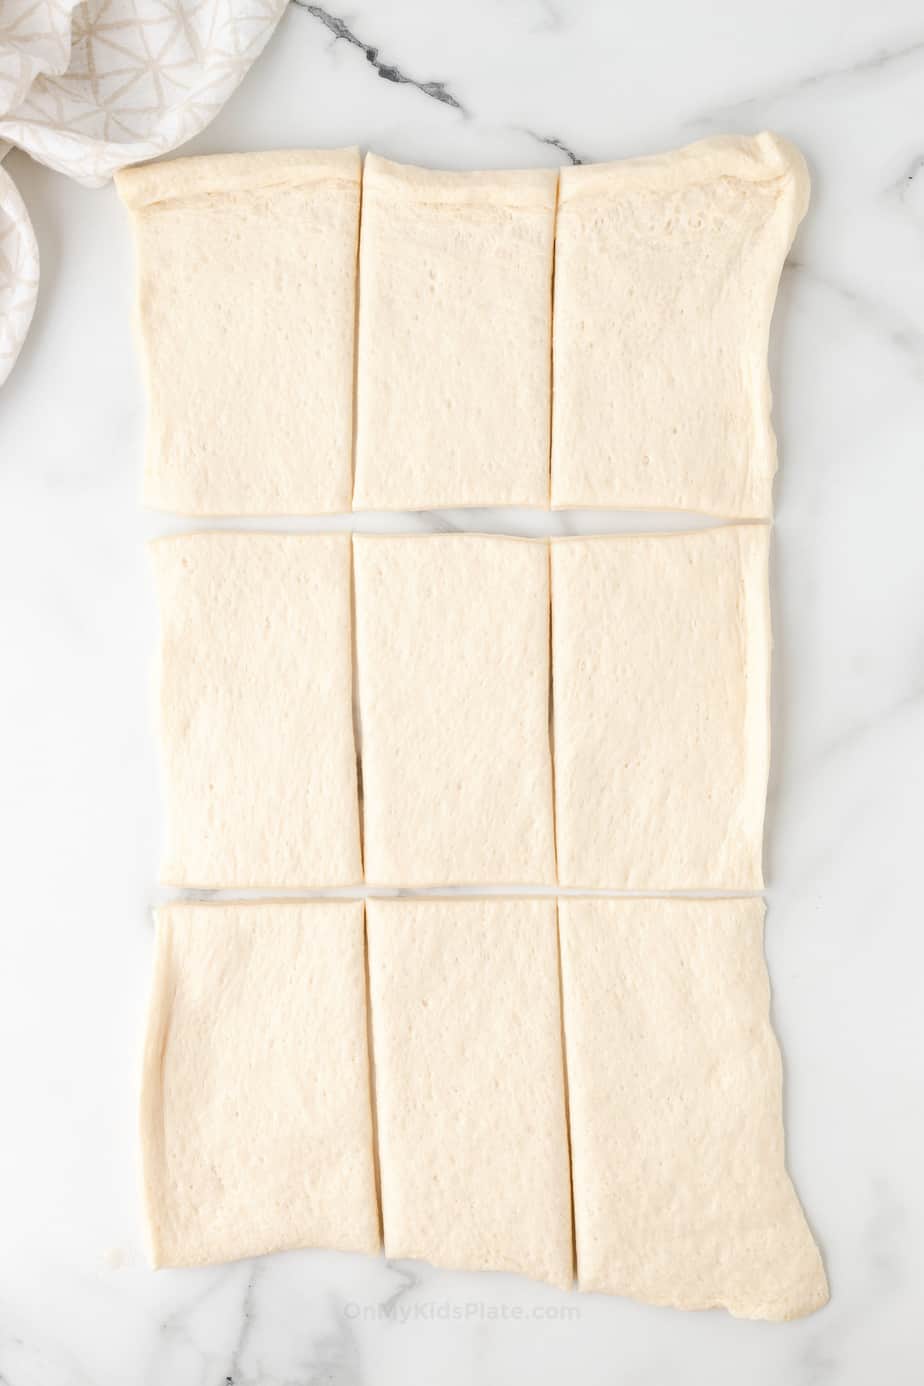 Pizza dough stretched into a rectangle and cut into nine smaller rectangles